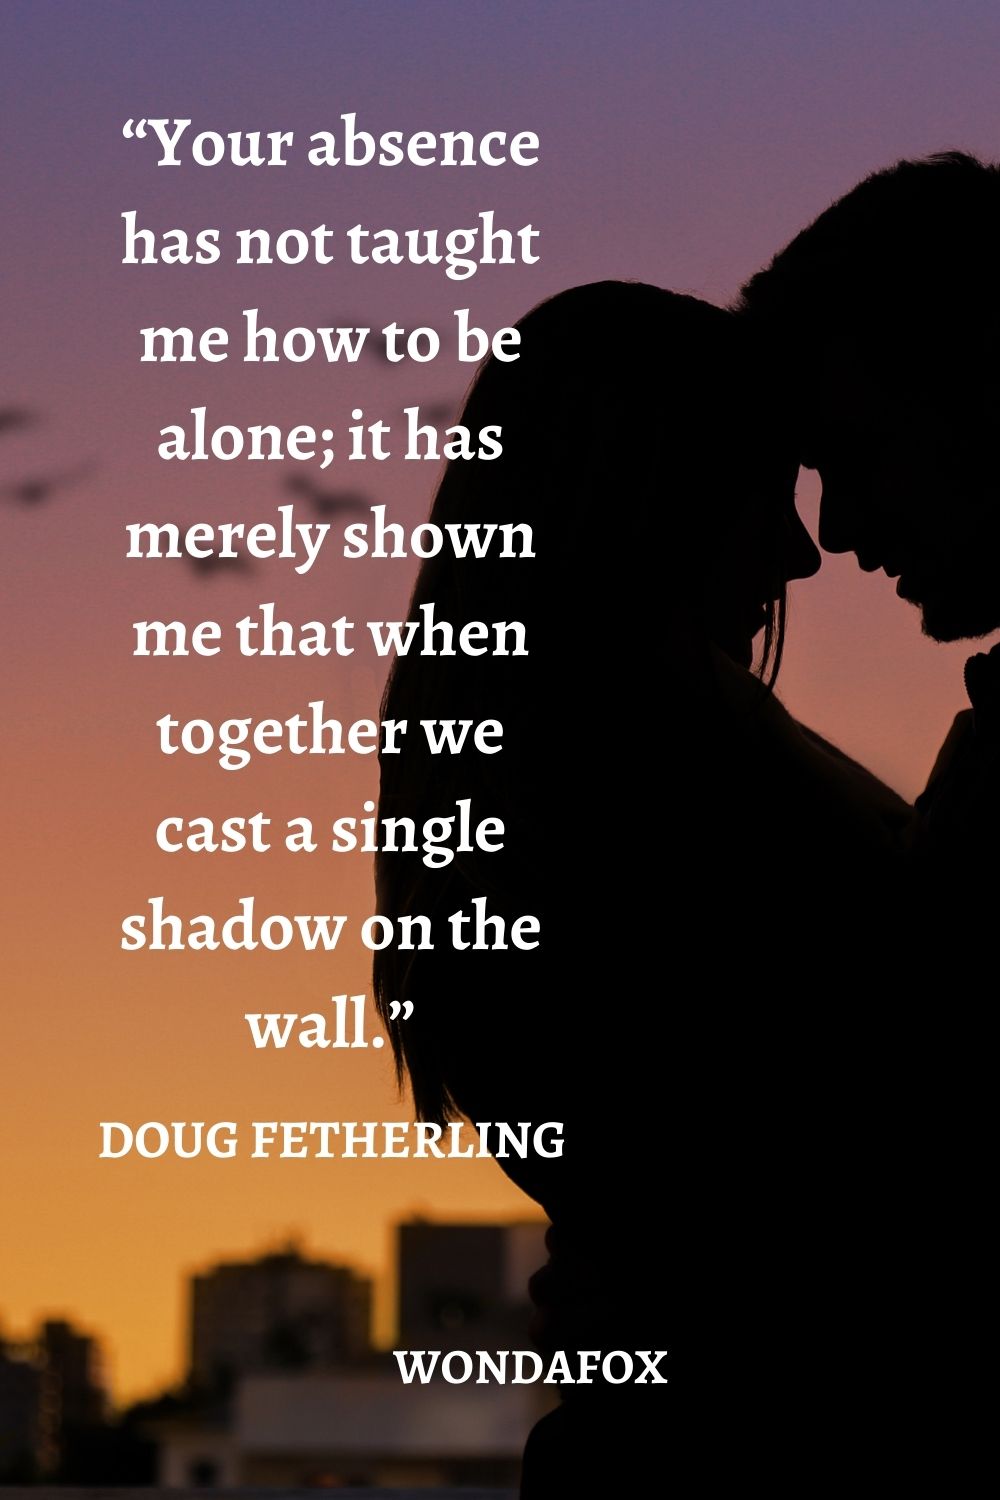 “Your absence has not taught me how to be alone; it has merely shown me that when together we cast a single shadow on the wall.”
Doug Fetherling